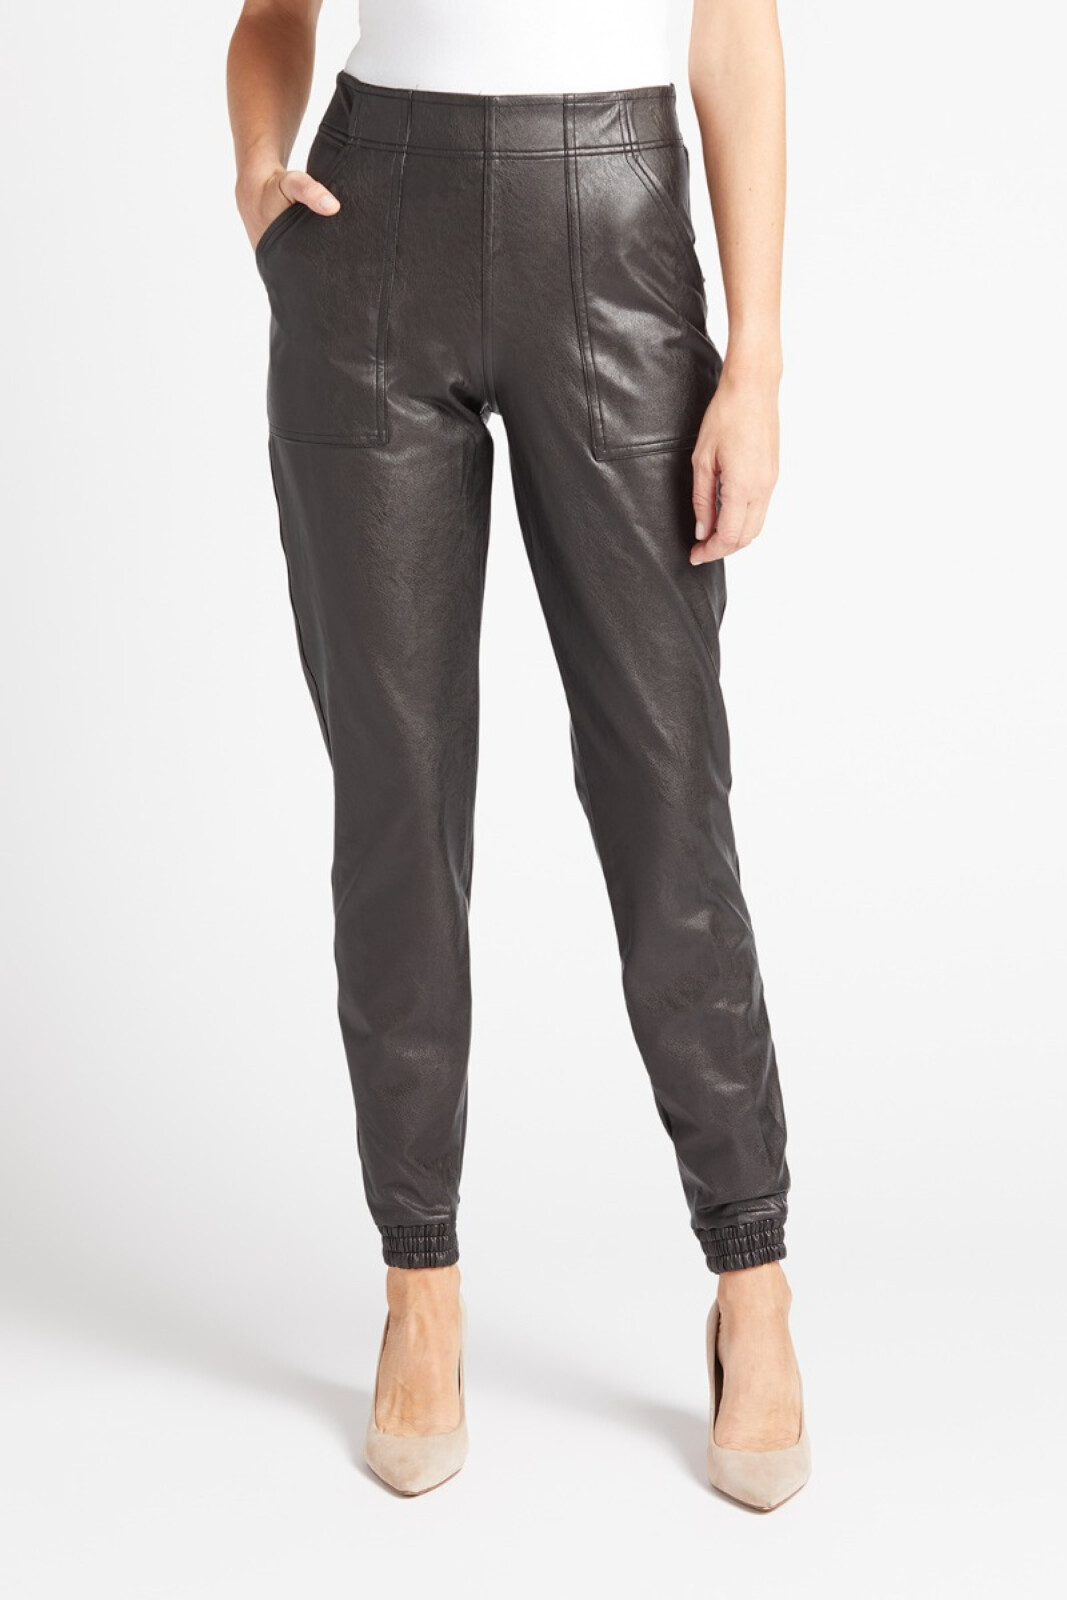 SPANX - Don't run.JOG! Our new Leather-Like Jogger is